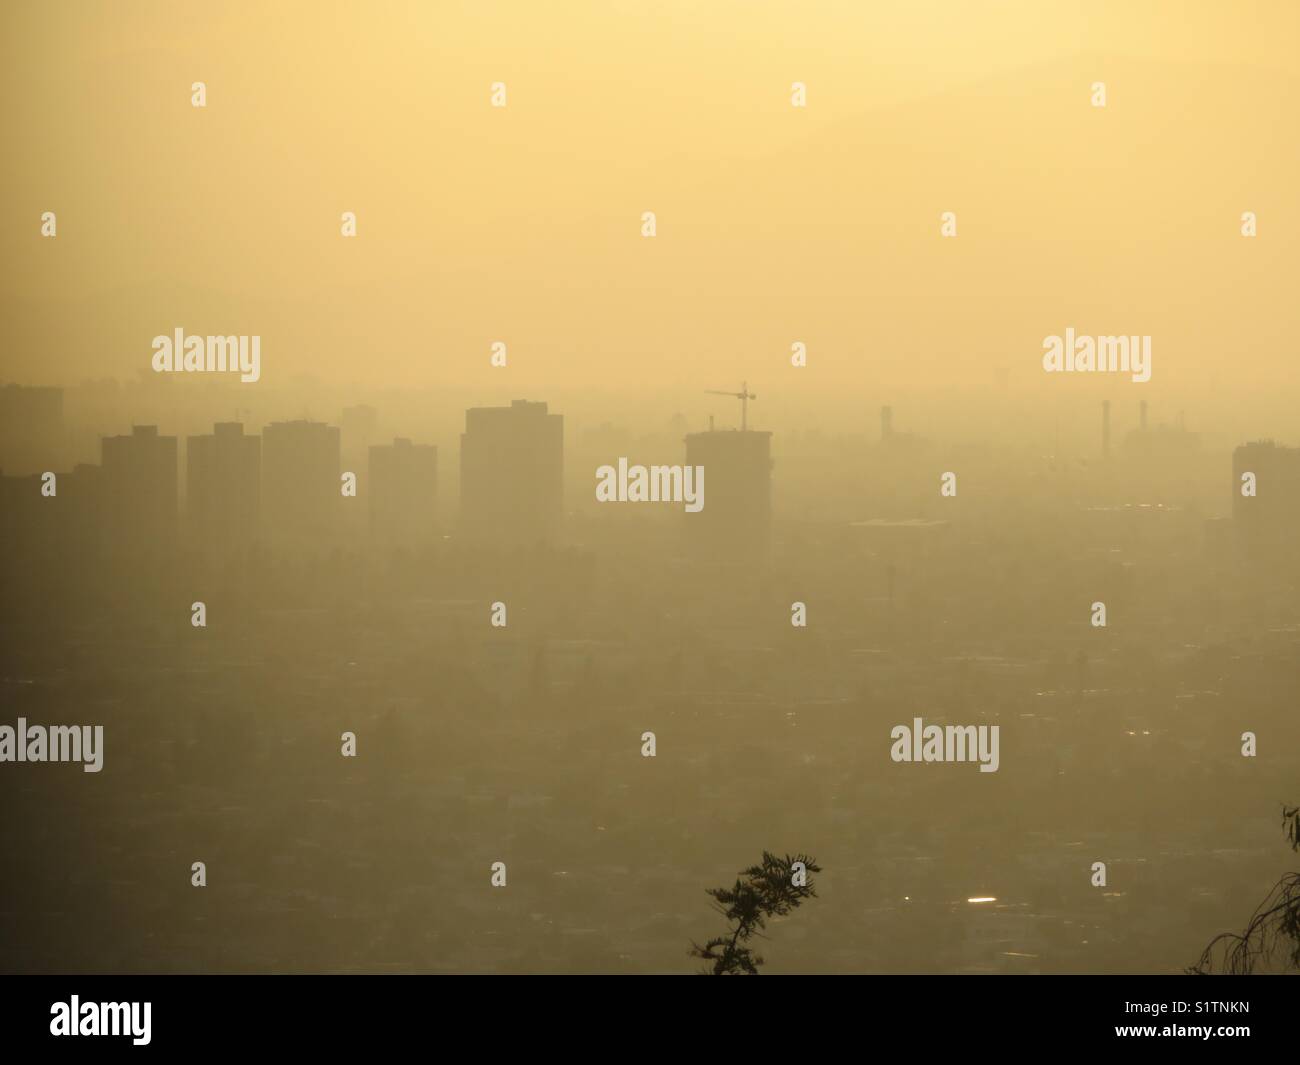 This is a View from the Santiago de Chile Metropolitan park. We can see the smog covering the city. Stock Photo